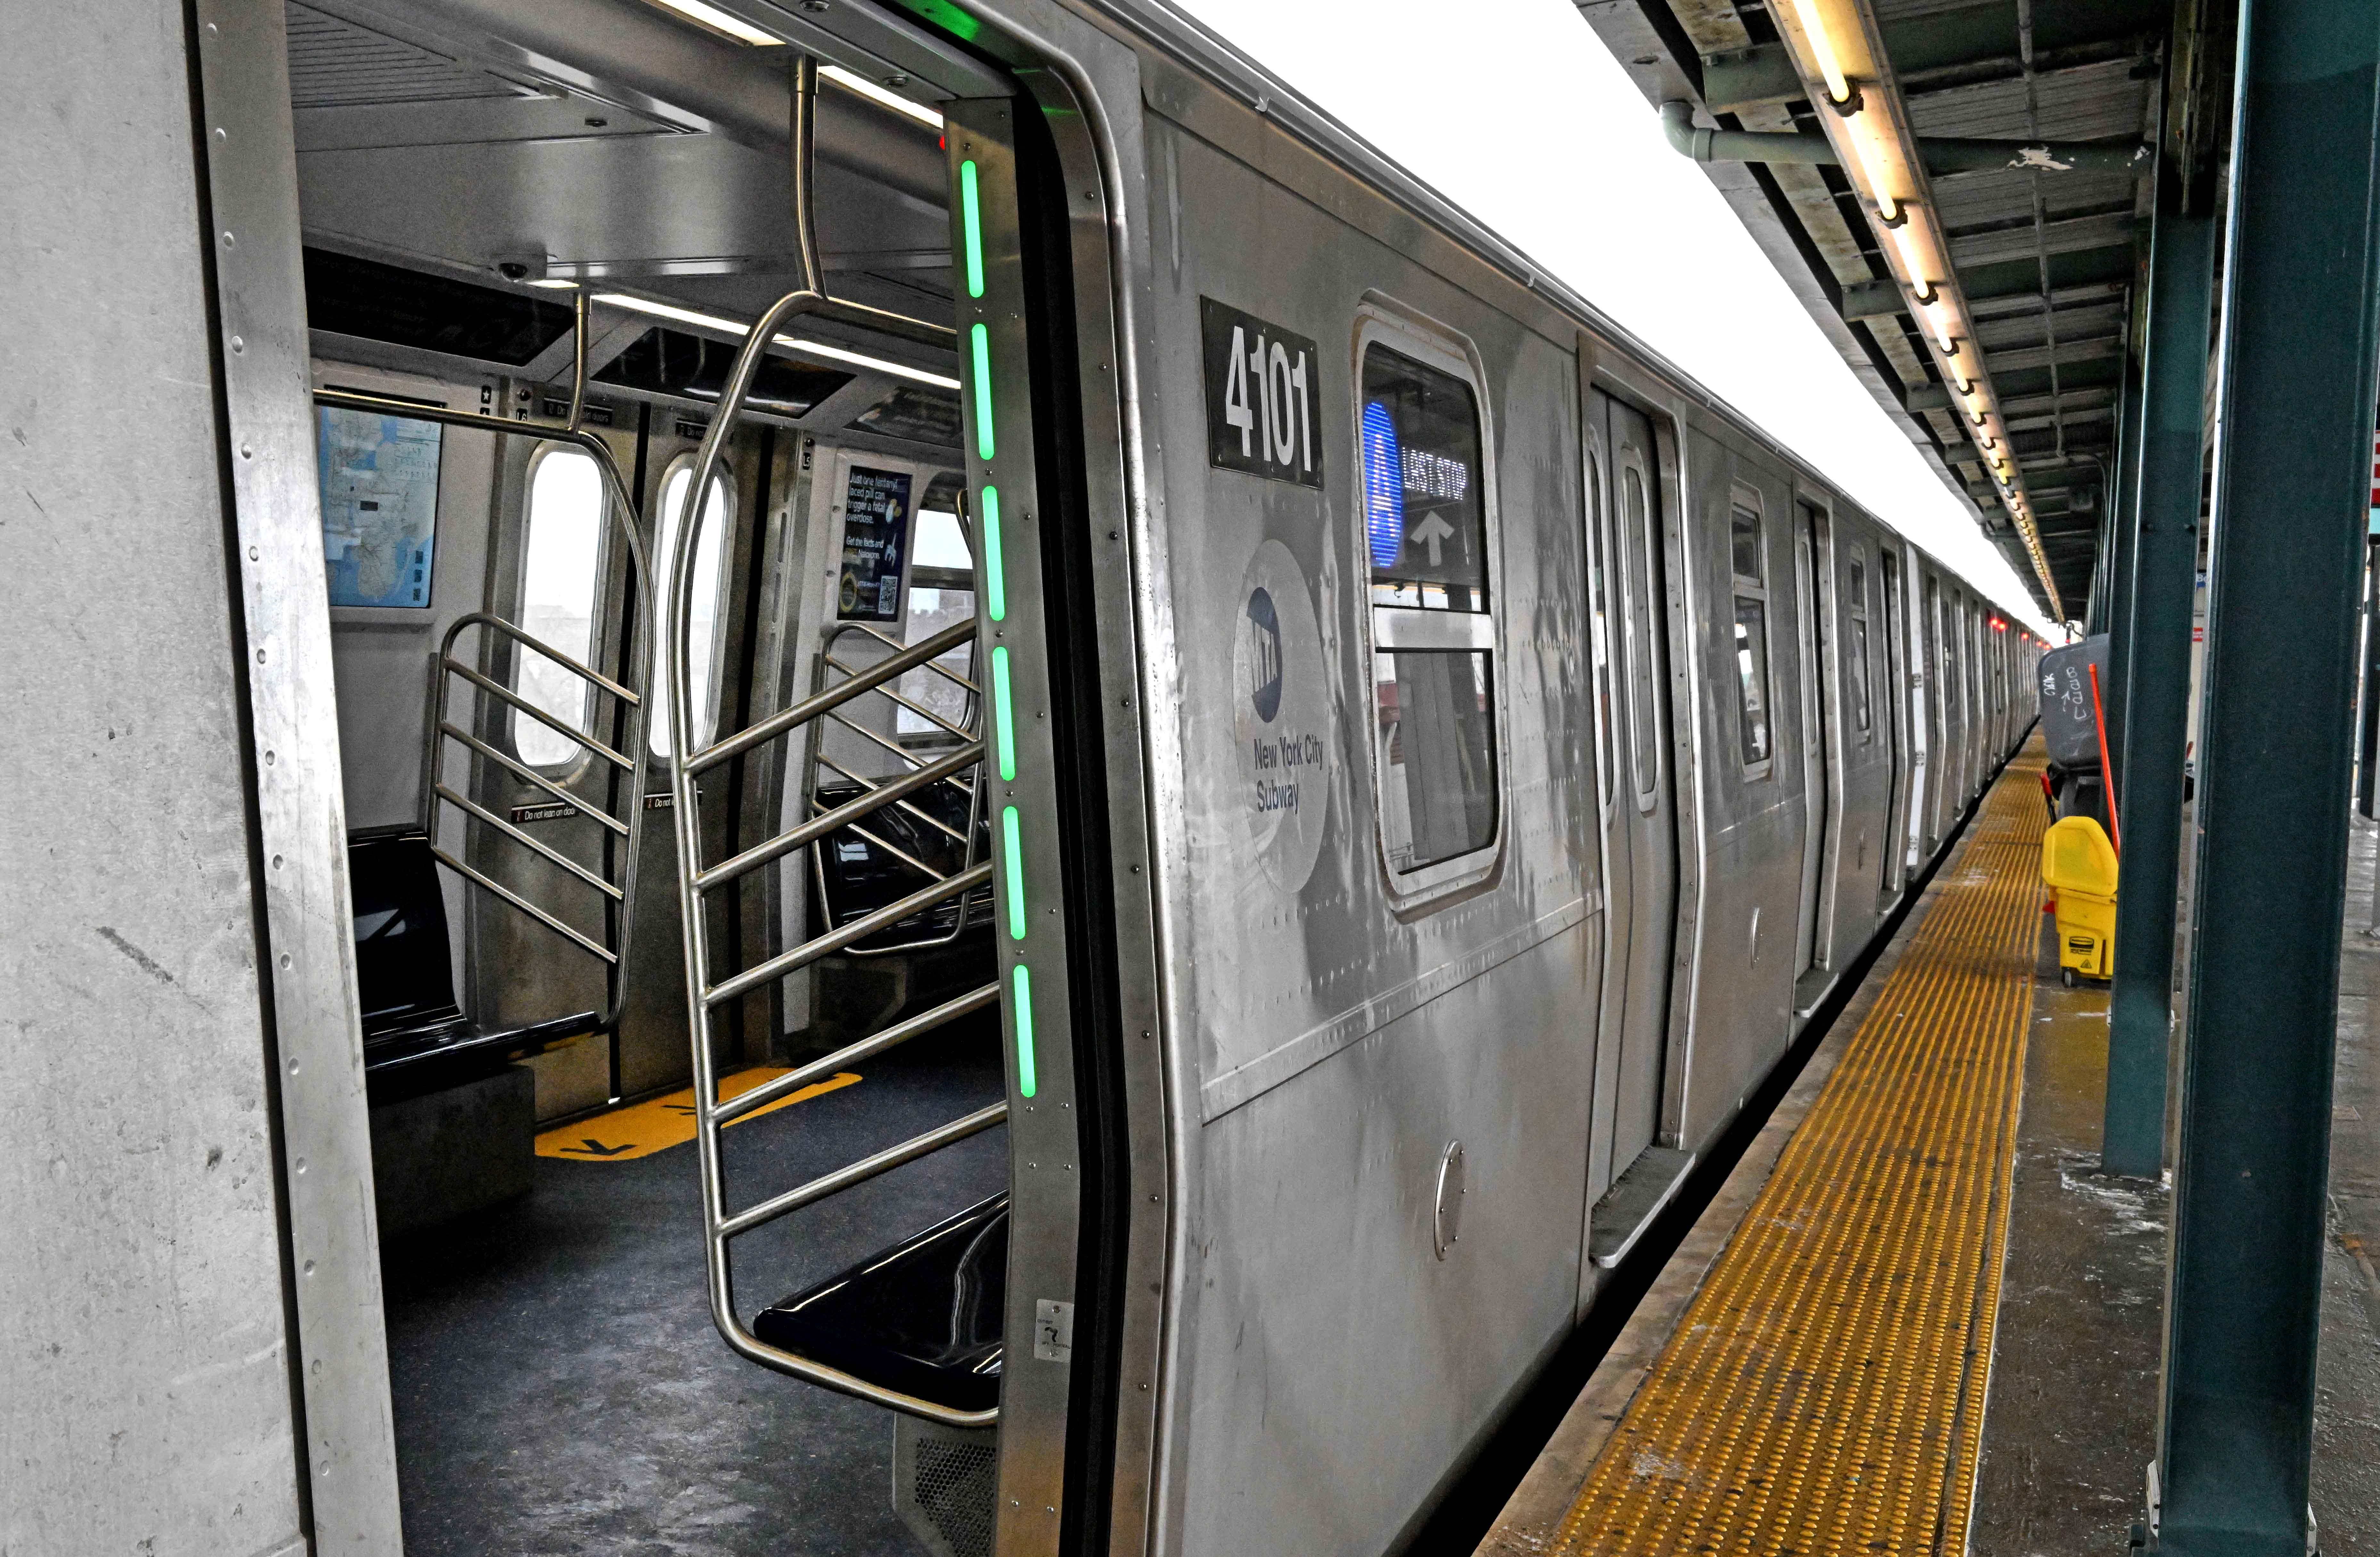 Photo shows the outside of an A subway train.